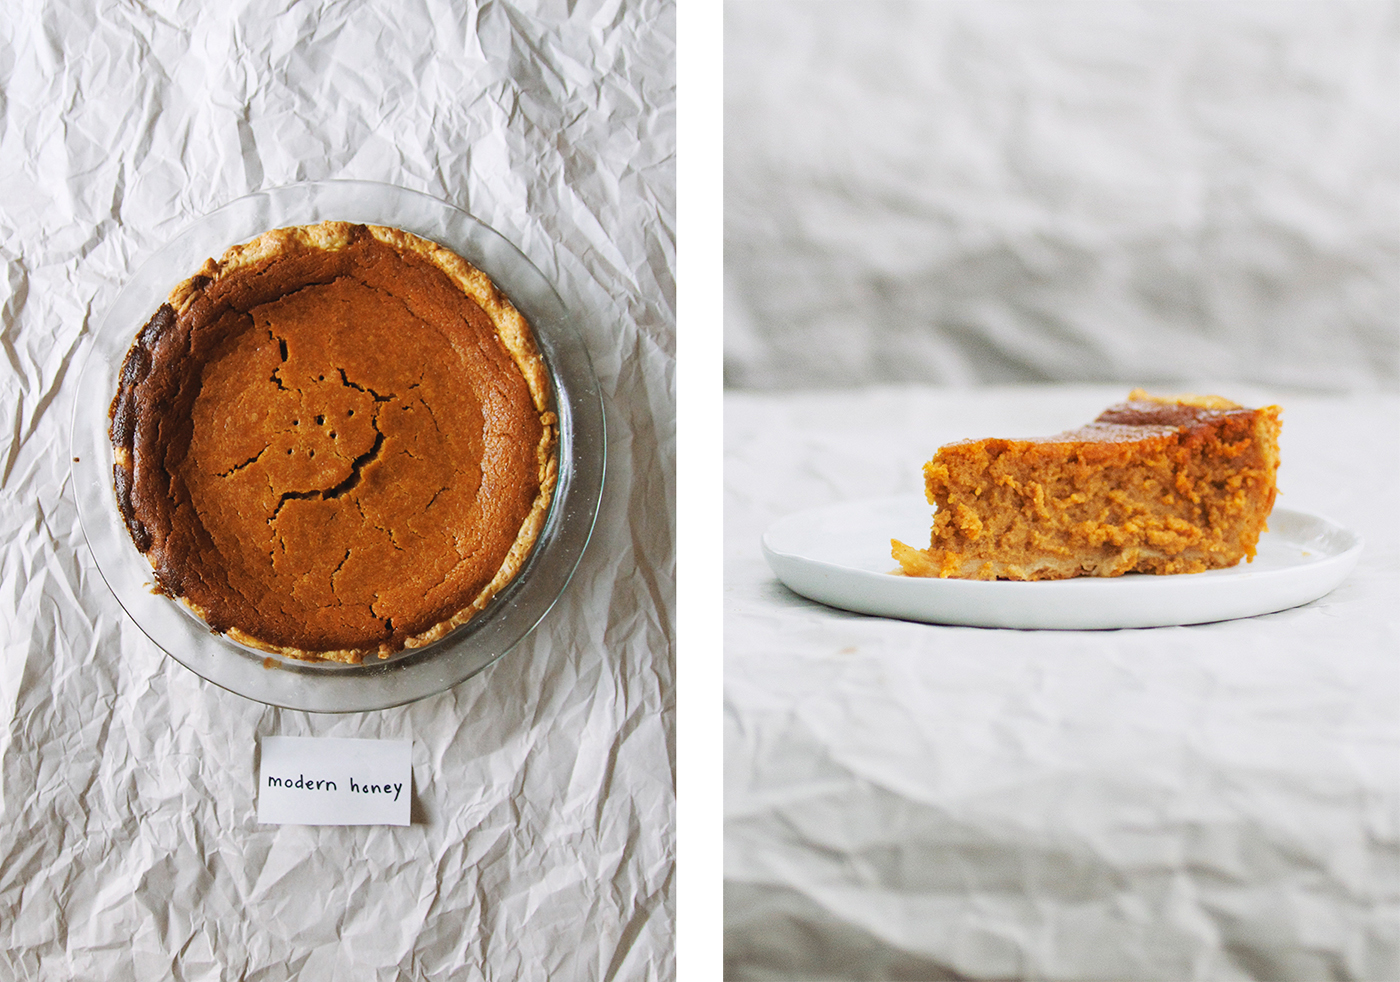 From left to right: Overhead view and sideview of Modern Honey's pumpkin pie recipe